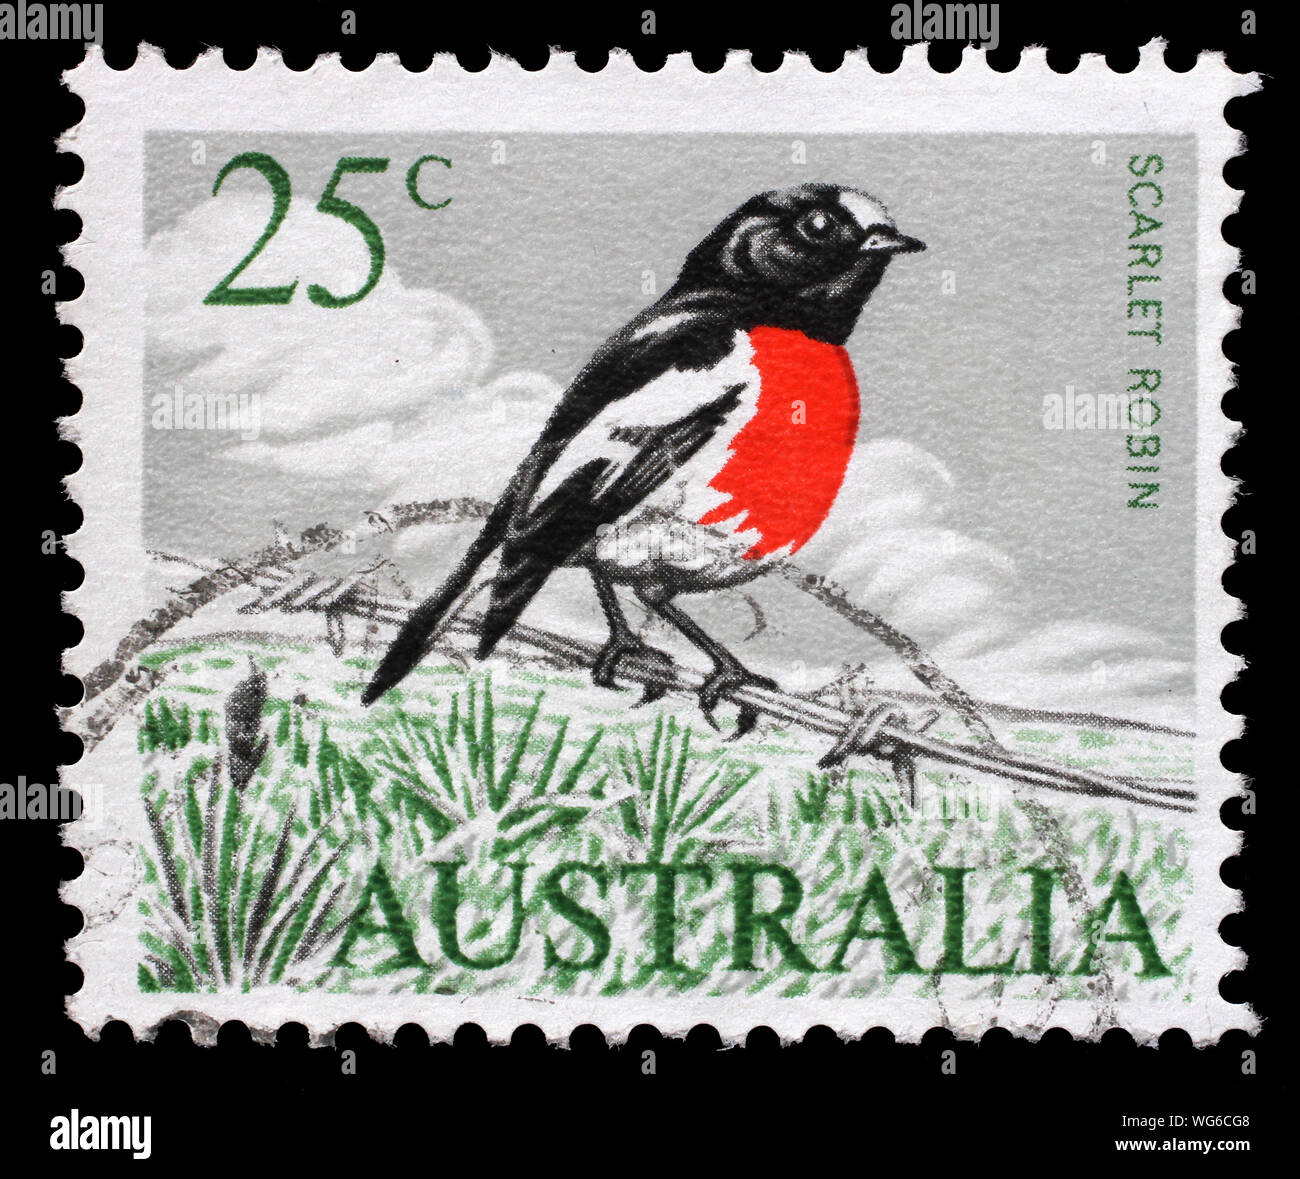 Stamp printed in Australia shows Eastern Scarlet Robin (Petroica boodang) - a common red-breasted Australasian robin, circa 1966. Stock Photo